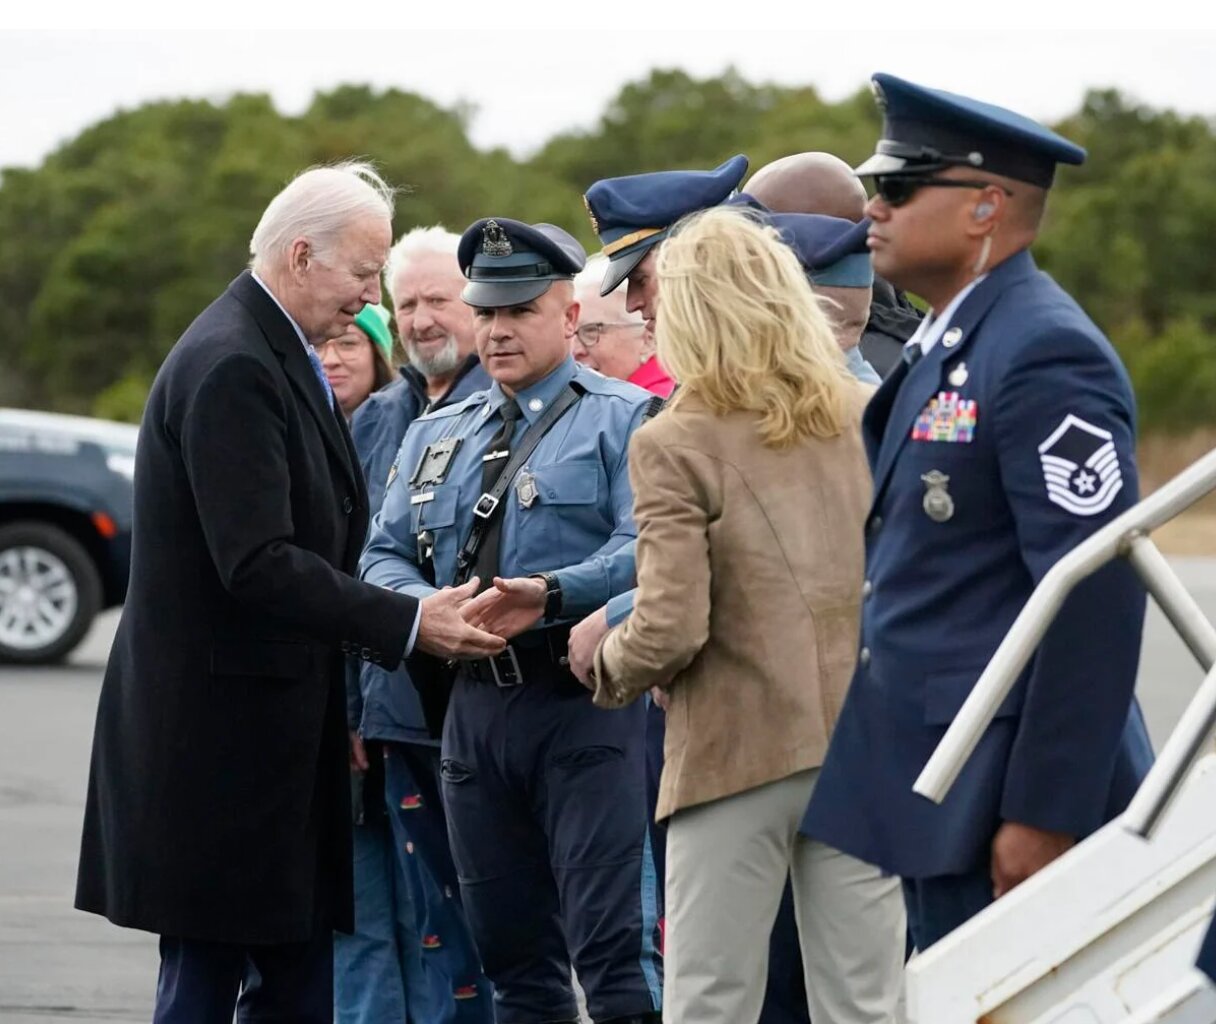 The president and first lady greet State Troopers on the tarmac at Nantucket Memorial Airport before leaving the island Sunday. At rear are Faregrounds Restaurant owners Bill and Kim Puder.